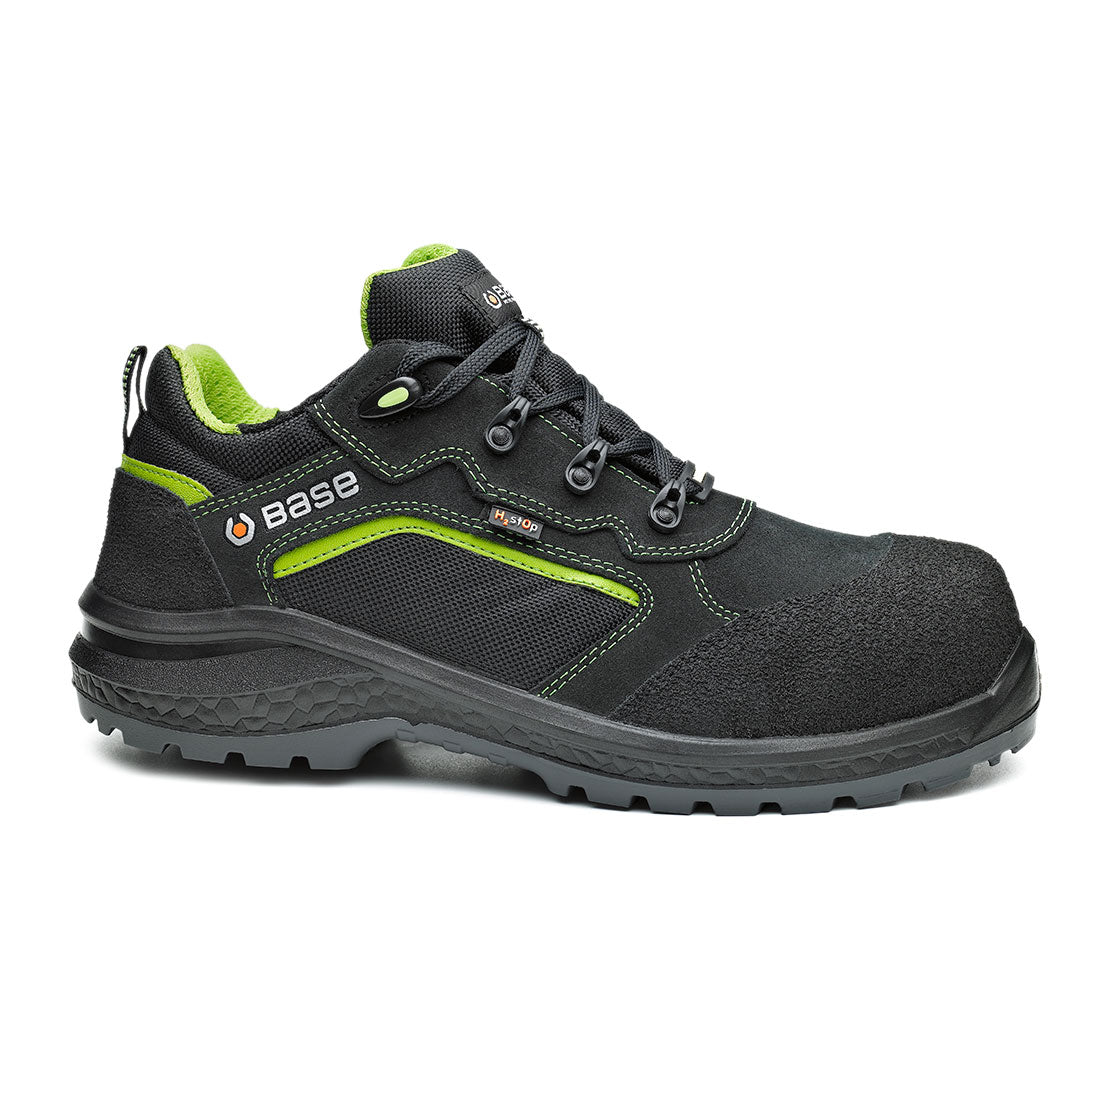 Base Be-Powerful Safety Shoes S3 WR SRC